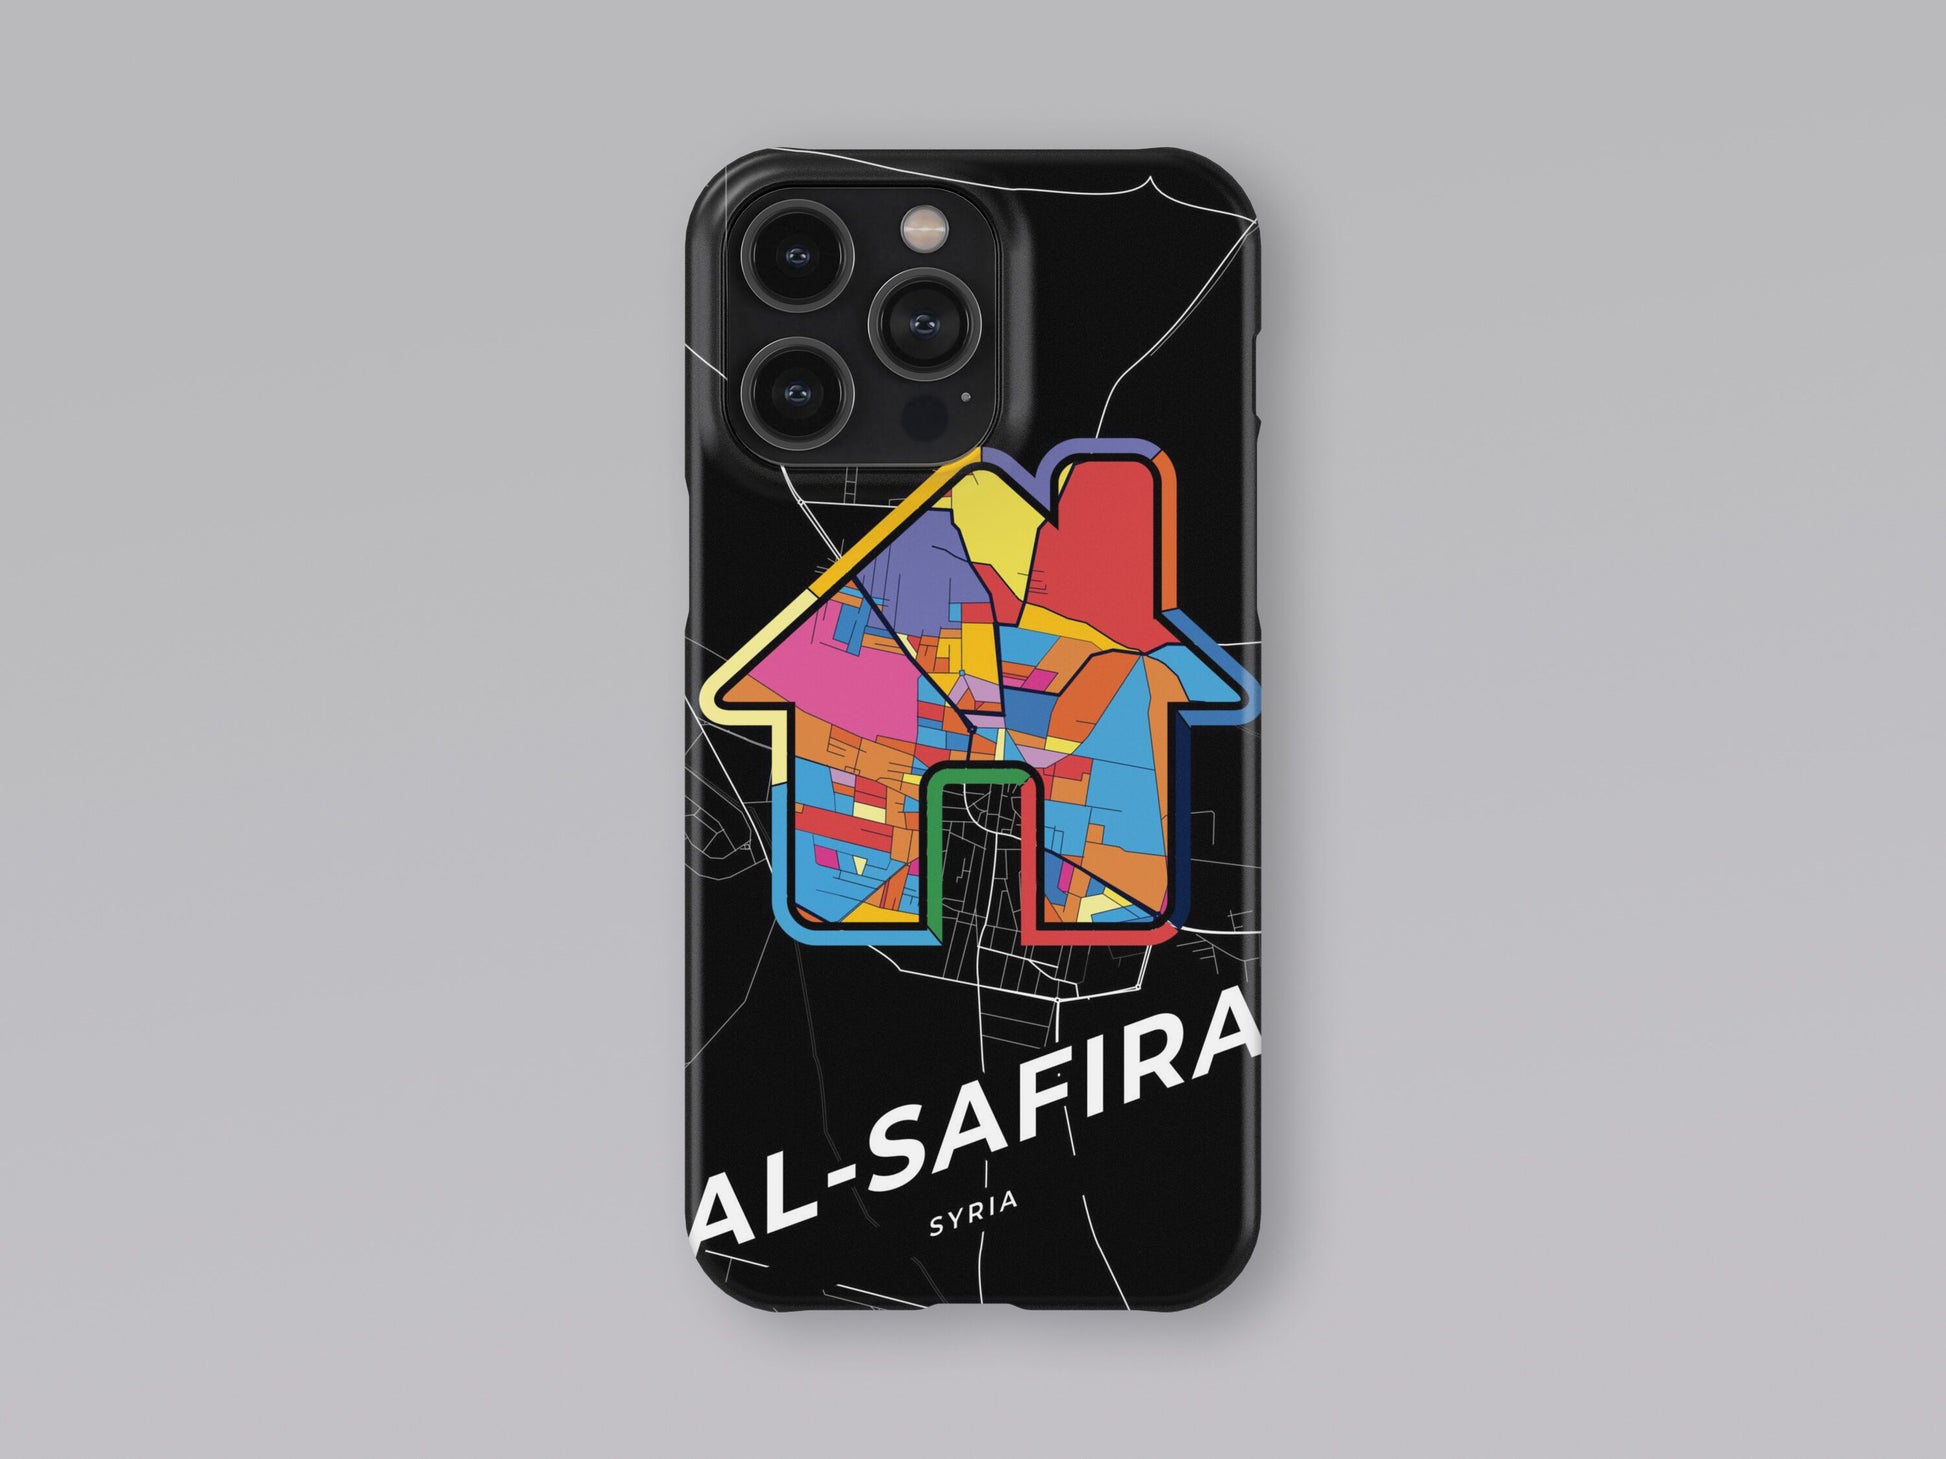 Al-Safira Syria slim phone case with colorful icon. Birthday, wedding or housewarming gift. Couple match cases. 3